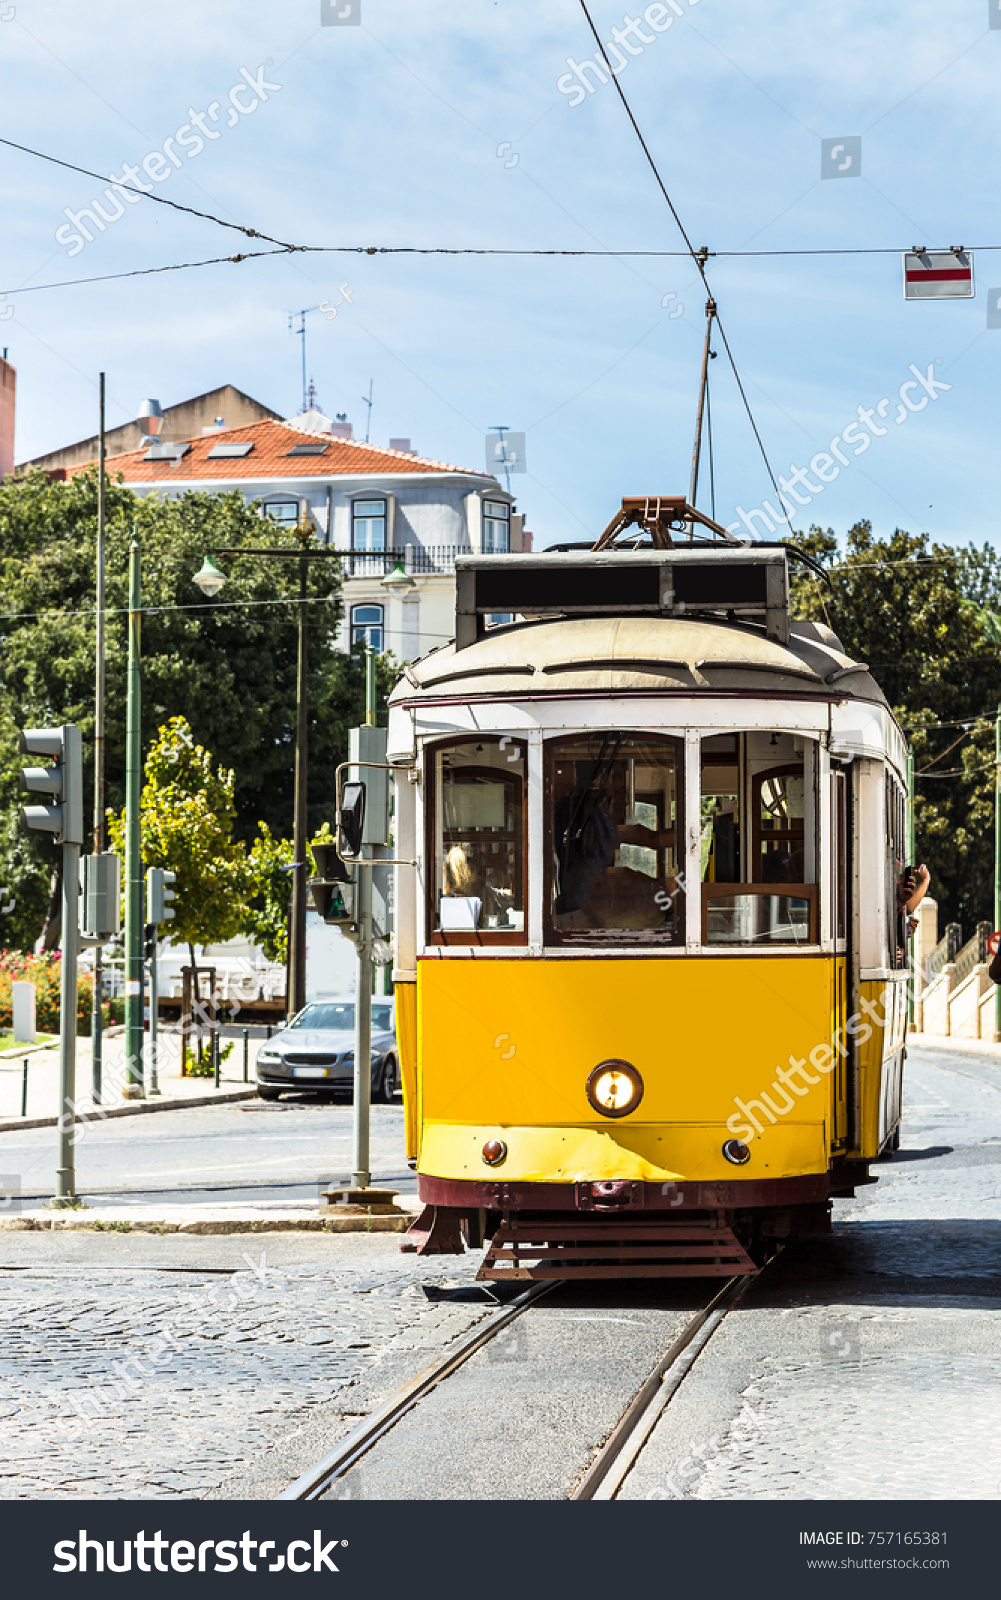 Vintage tram in the city center of Lisbon, Portugal in a summer day #757165381